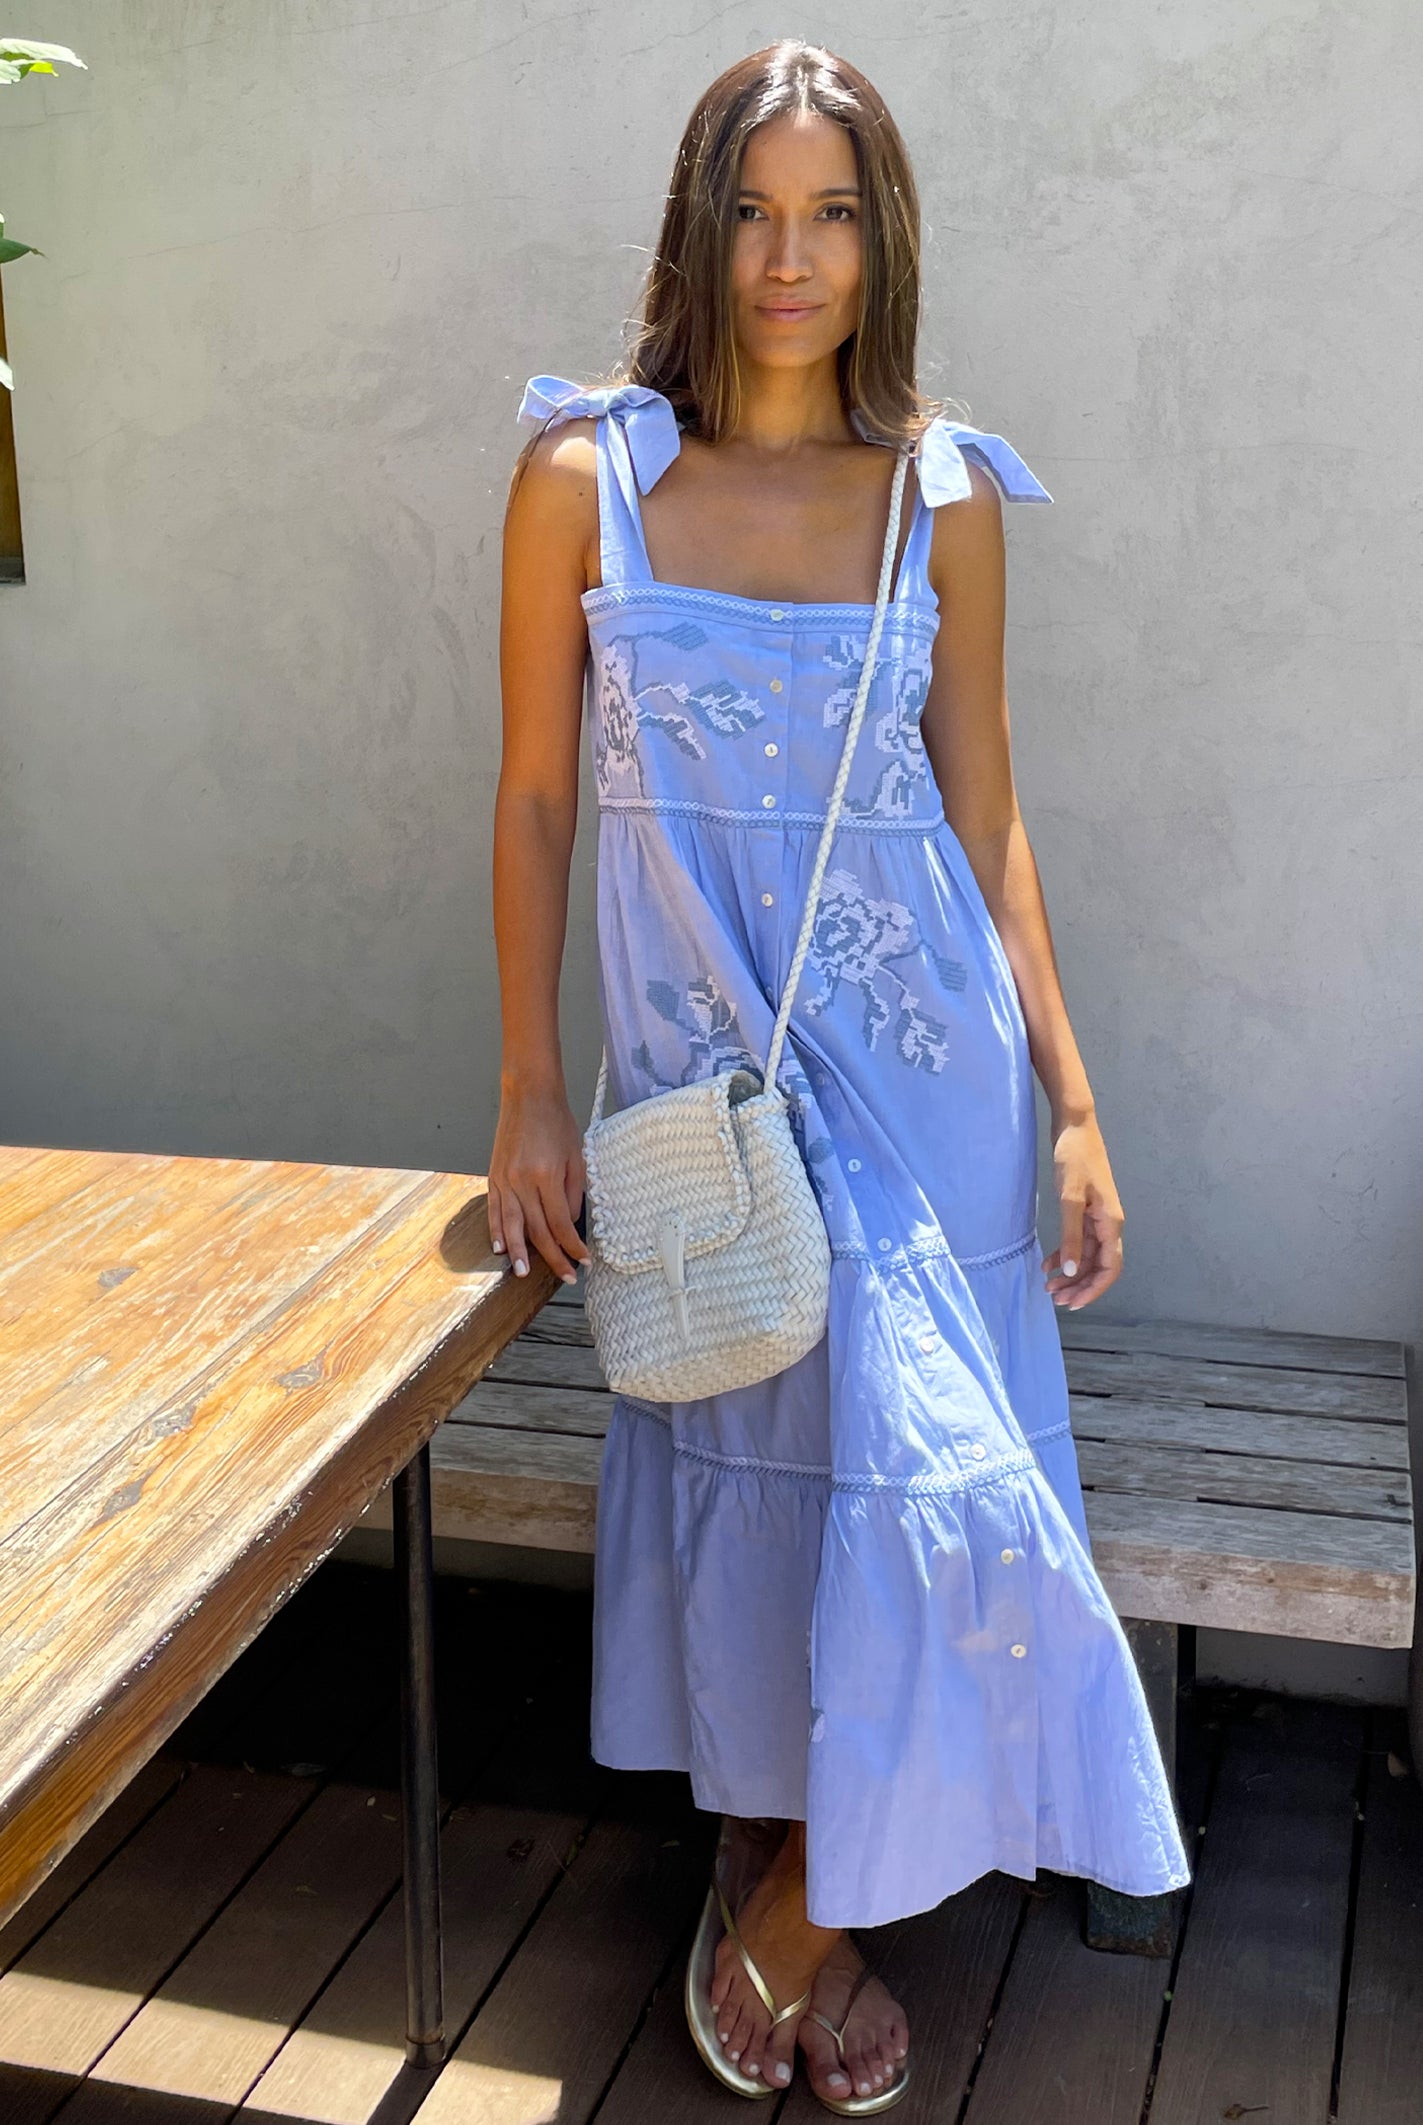 A model stood in a garden wearing a Rose and Rose blue cotton Marina sundress and a white leather Dragon bag.